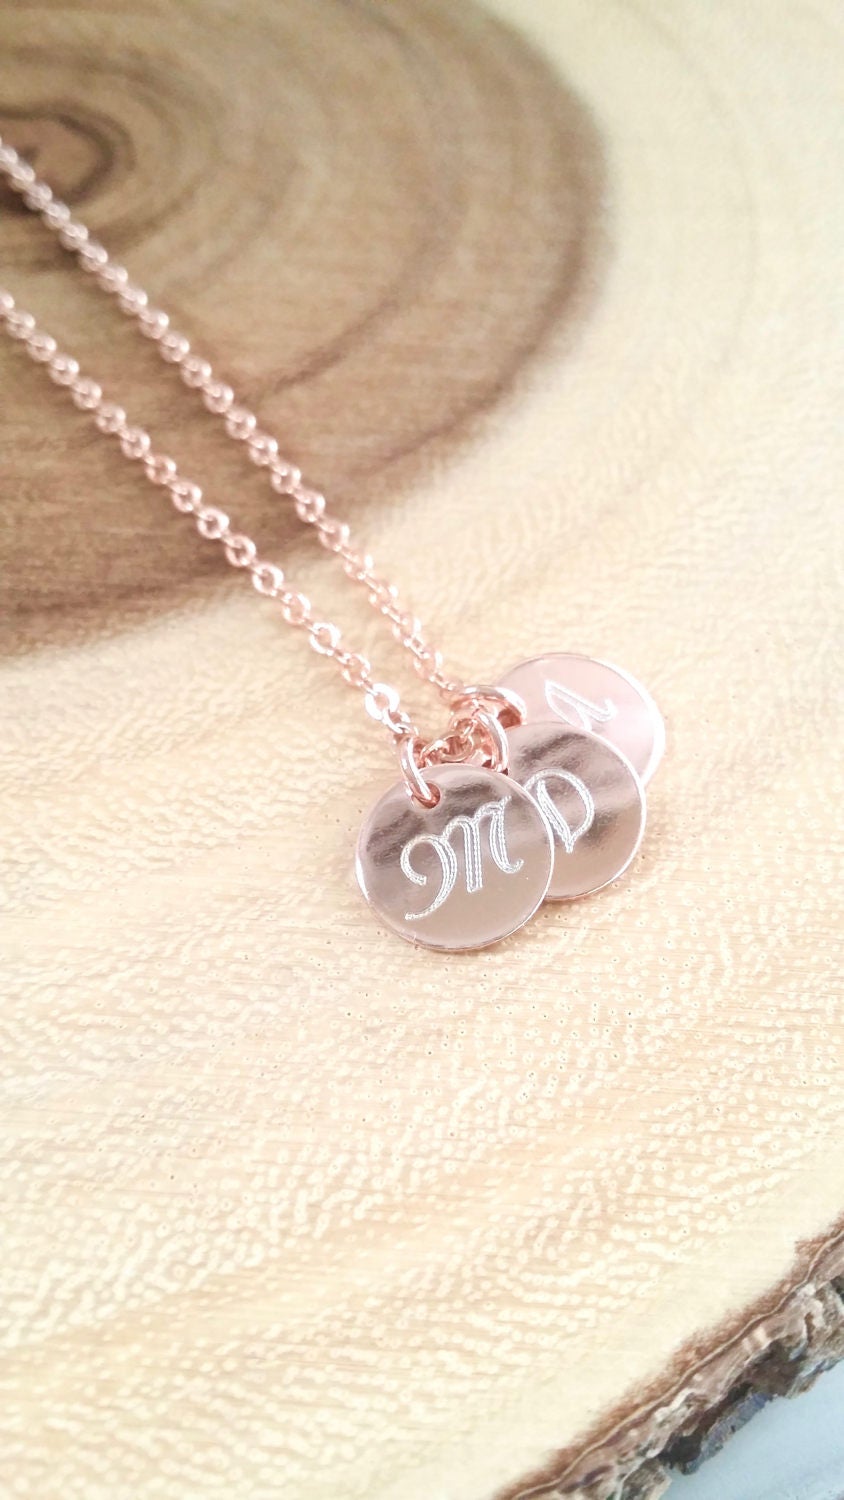 Initial necklace in rose gold - Monogram Disc necklace